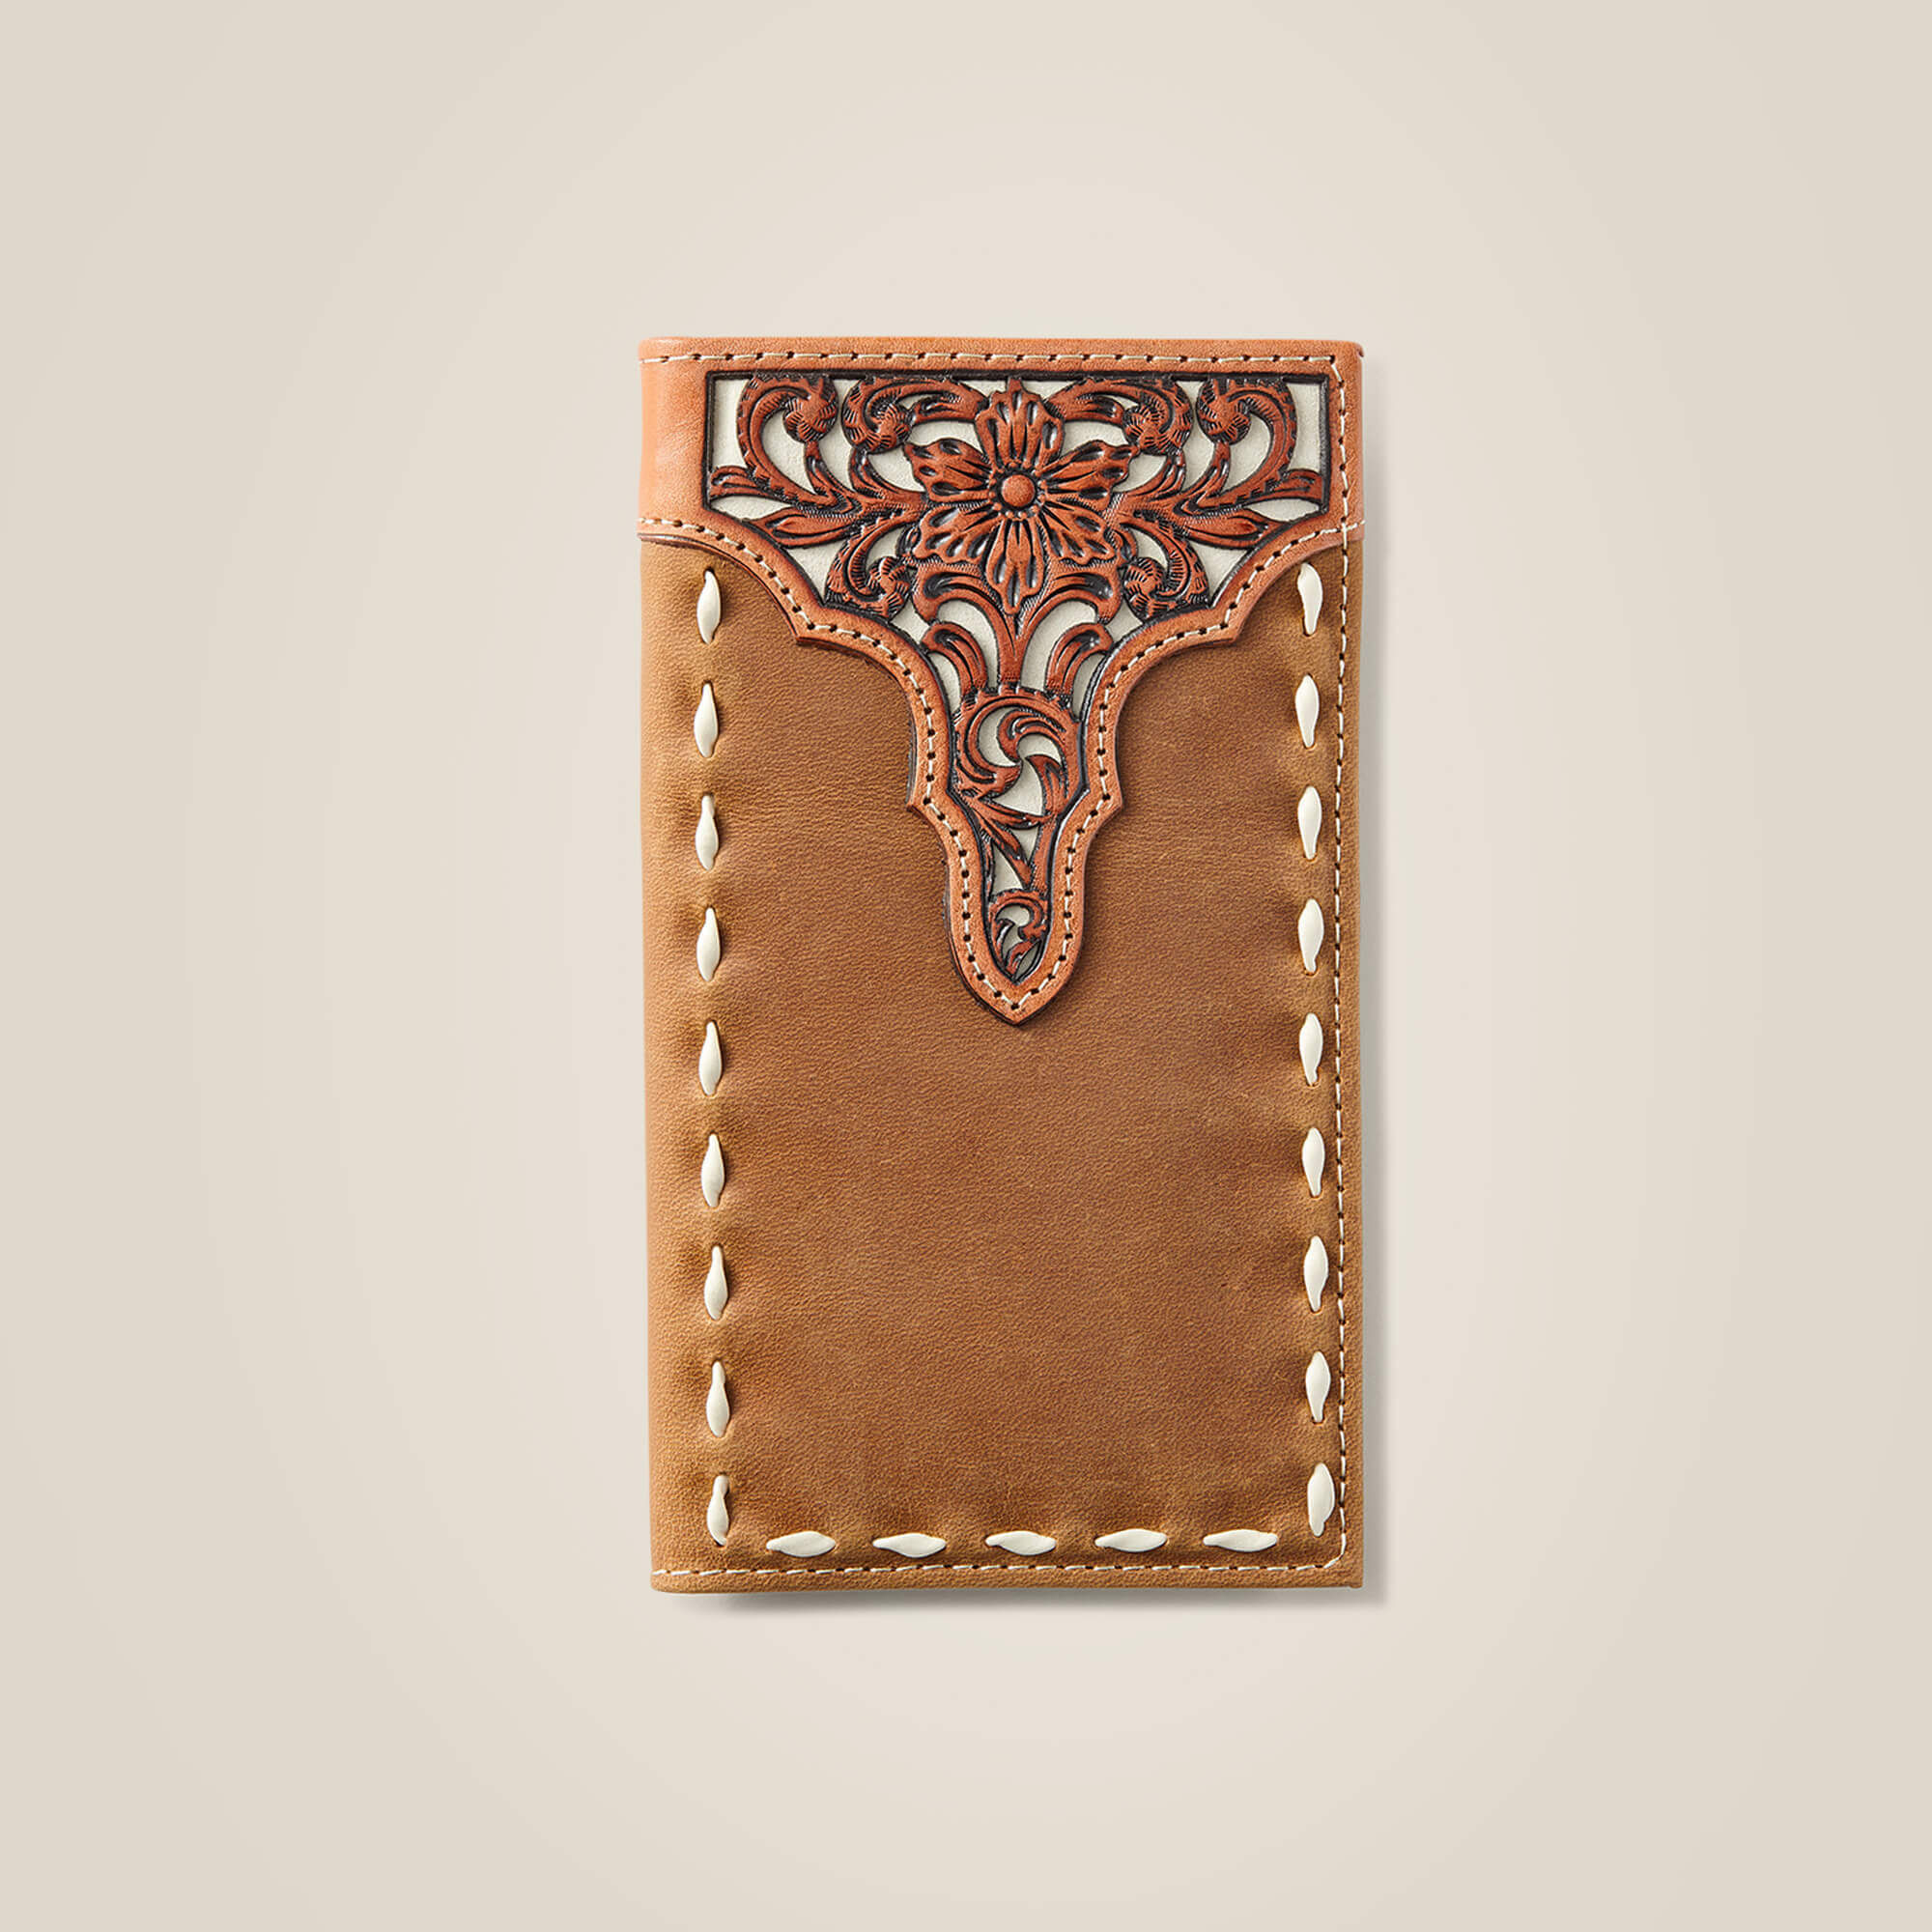 Men's Rodeo Wallet Floral Embroidery Run Stitch in Medium Brown Leather,  Size: OS by Ariat